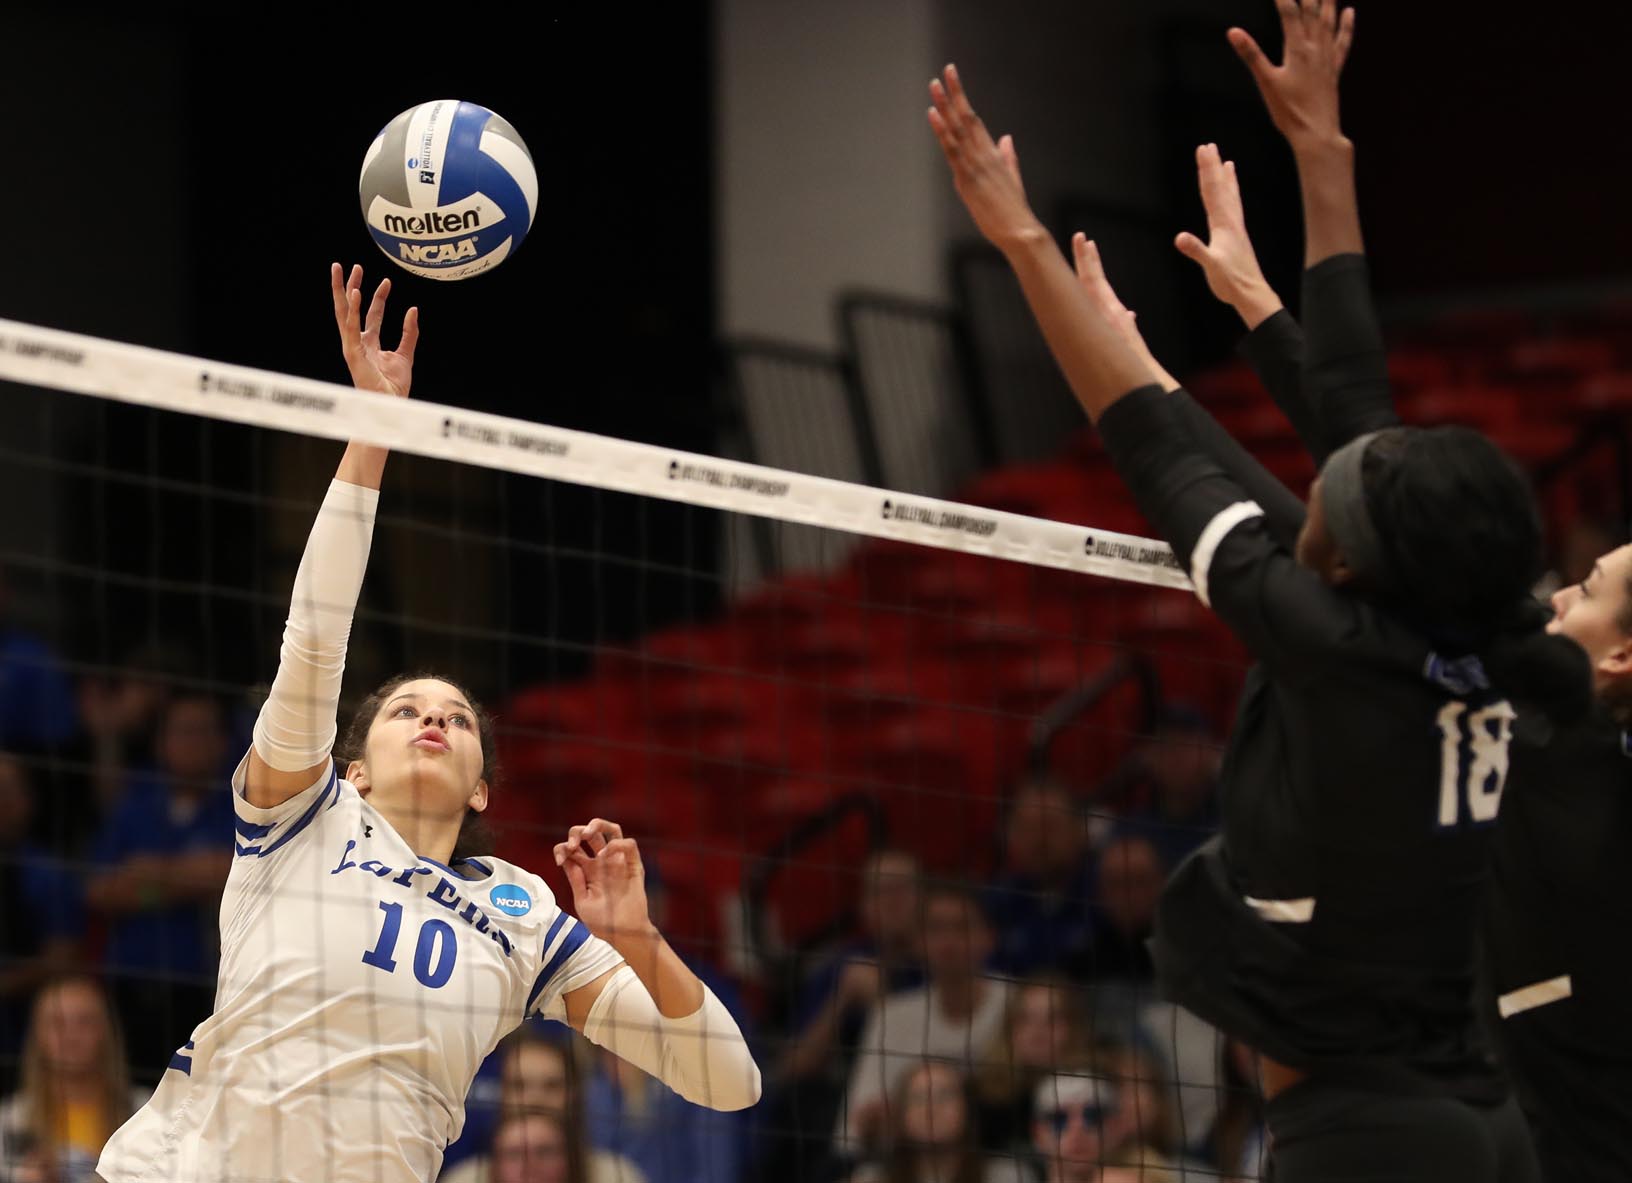 Julianne Jackson (10) is one of four seniors who finished their UNK volleyball careers during Saturday’s NCAA Division II national championship match in Denver. (Photos by Corbey R. Dorsey, UNK Communications)